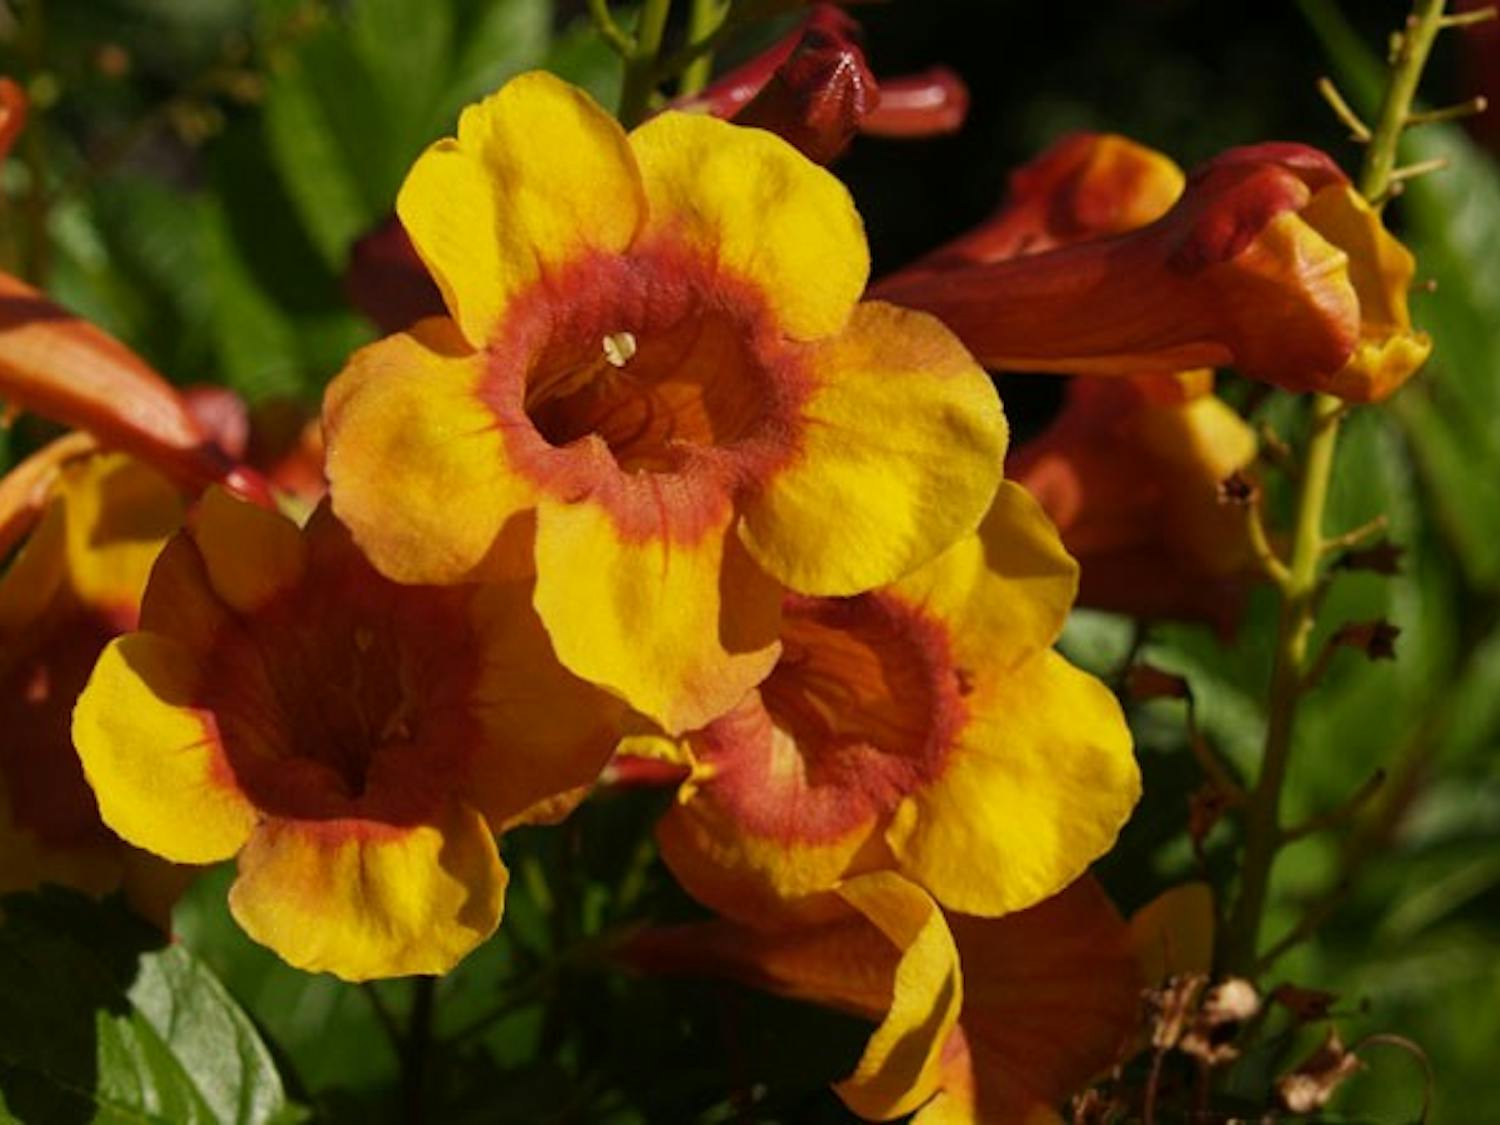 Professor George Hull bred Sparky, a flower derived from the red and yellow Tecoma flower. This flower can be purchased at most major retailers that have a flower nursery. (Photo courtesy of George Hull)